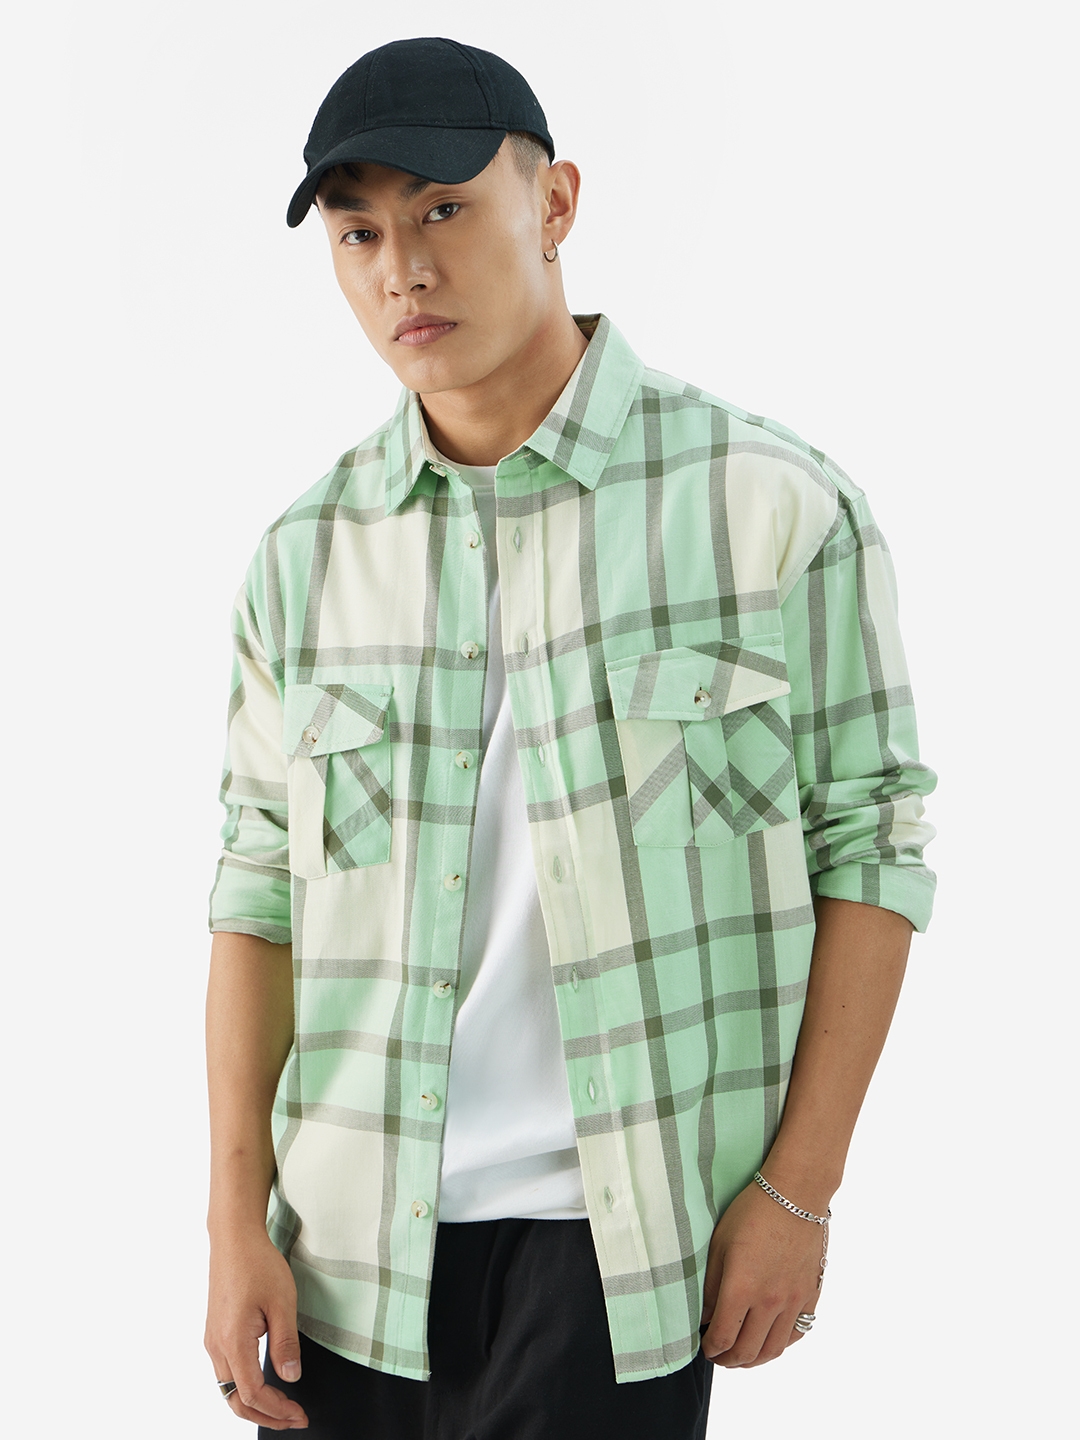 The Souled Store | Men's Plaid: Green And White Men's Relaxed Shirts